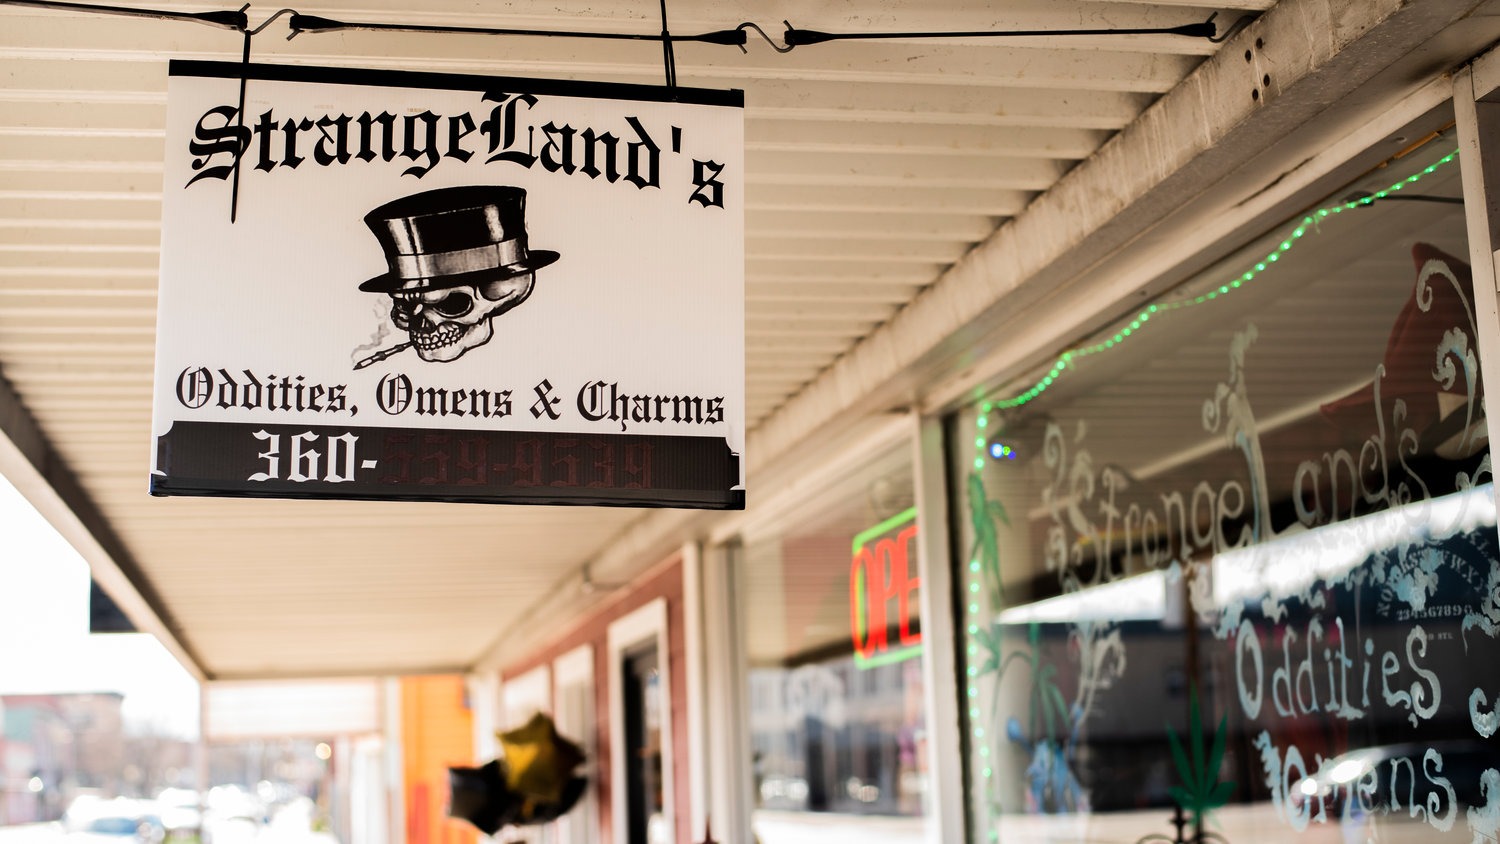 StrangeLands is located at 531 North Tower Avenue in downtown Centralia.